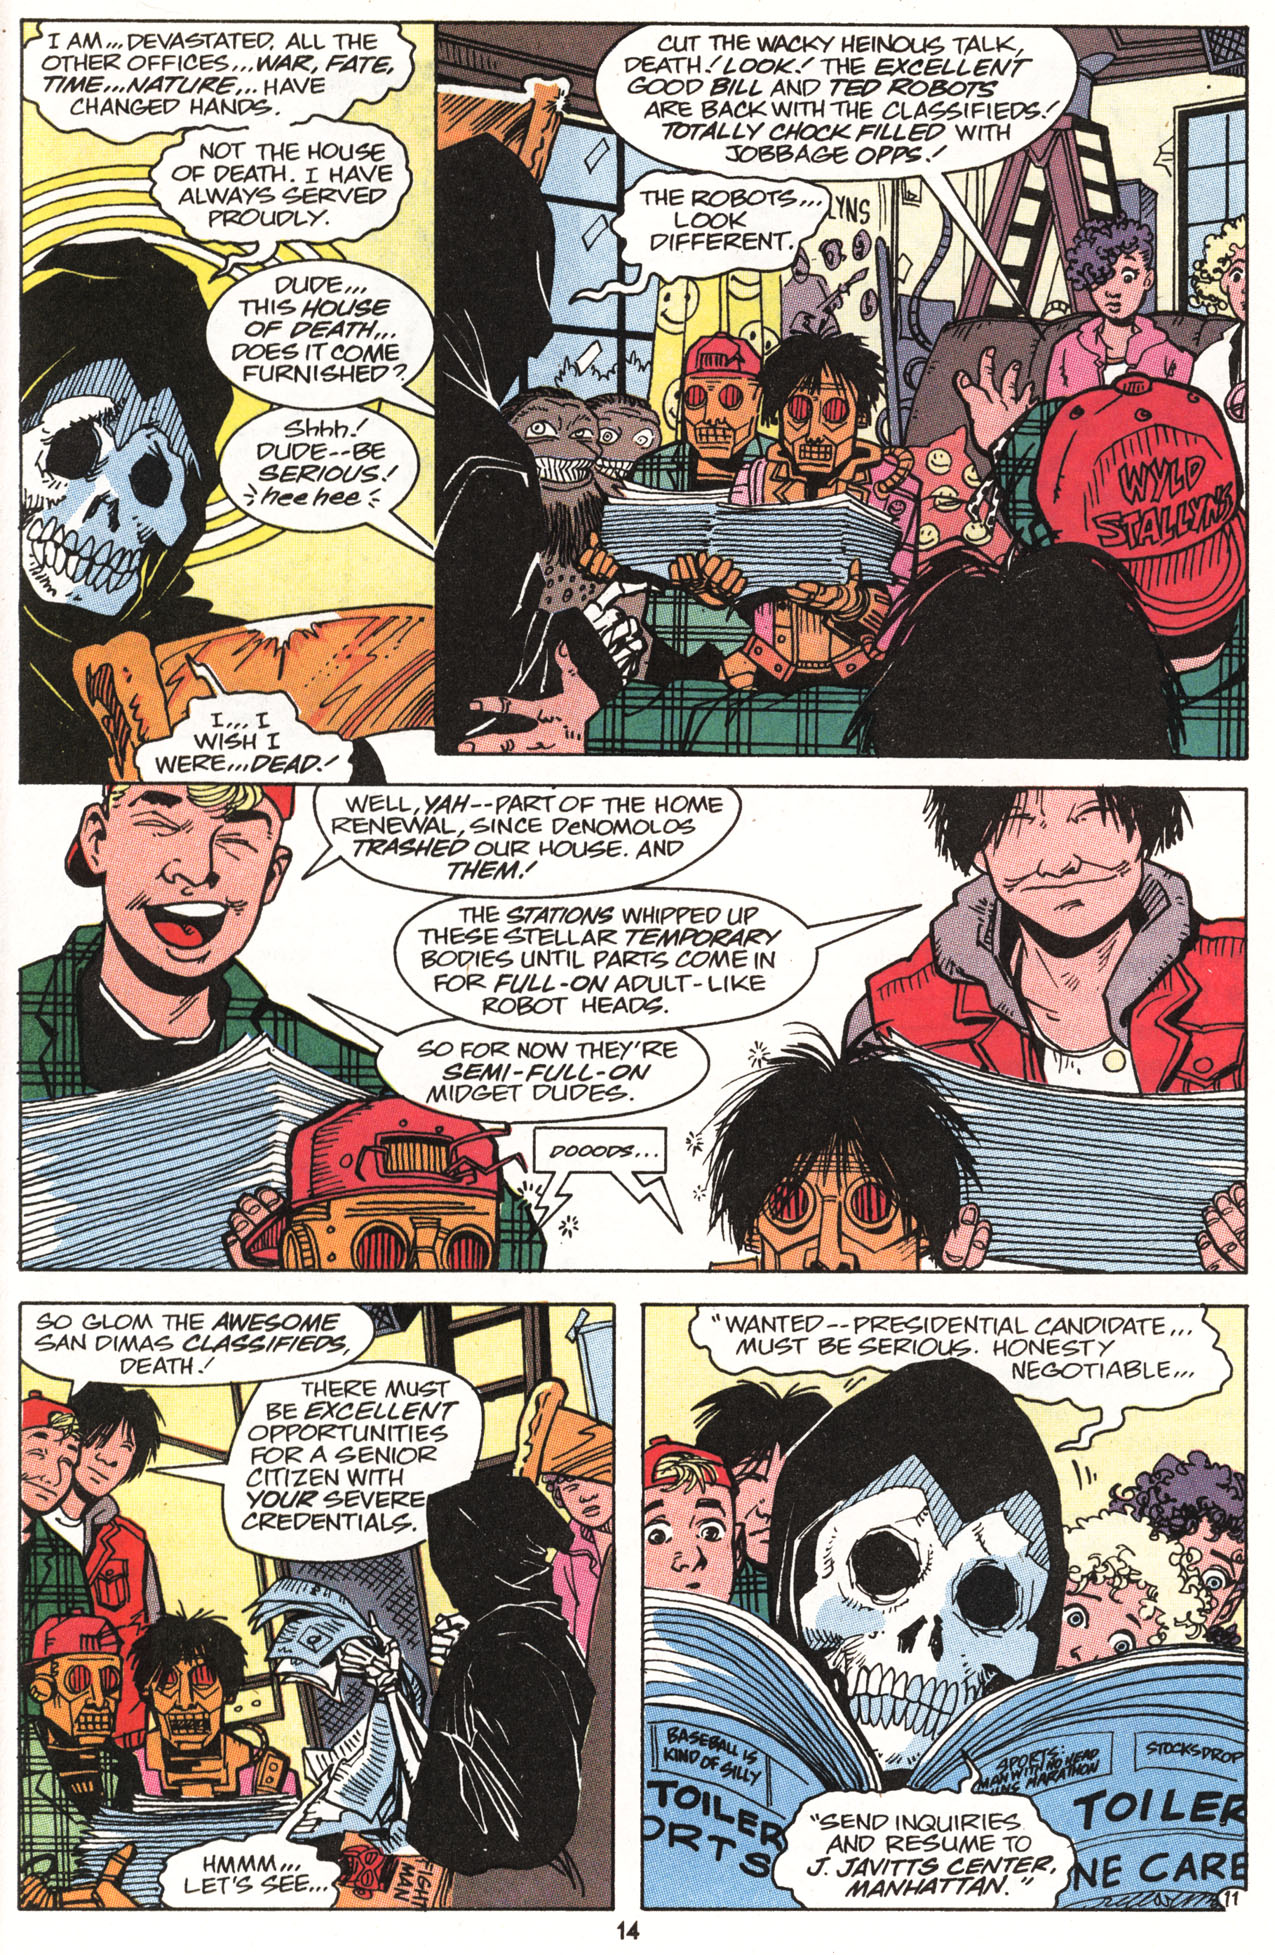 Read online Bill & Ted's Excellent Comic Book comic -  Issue #9 - 16